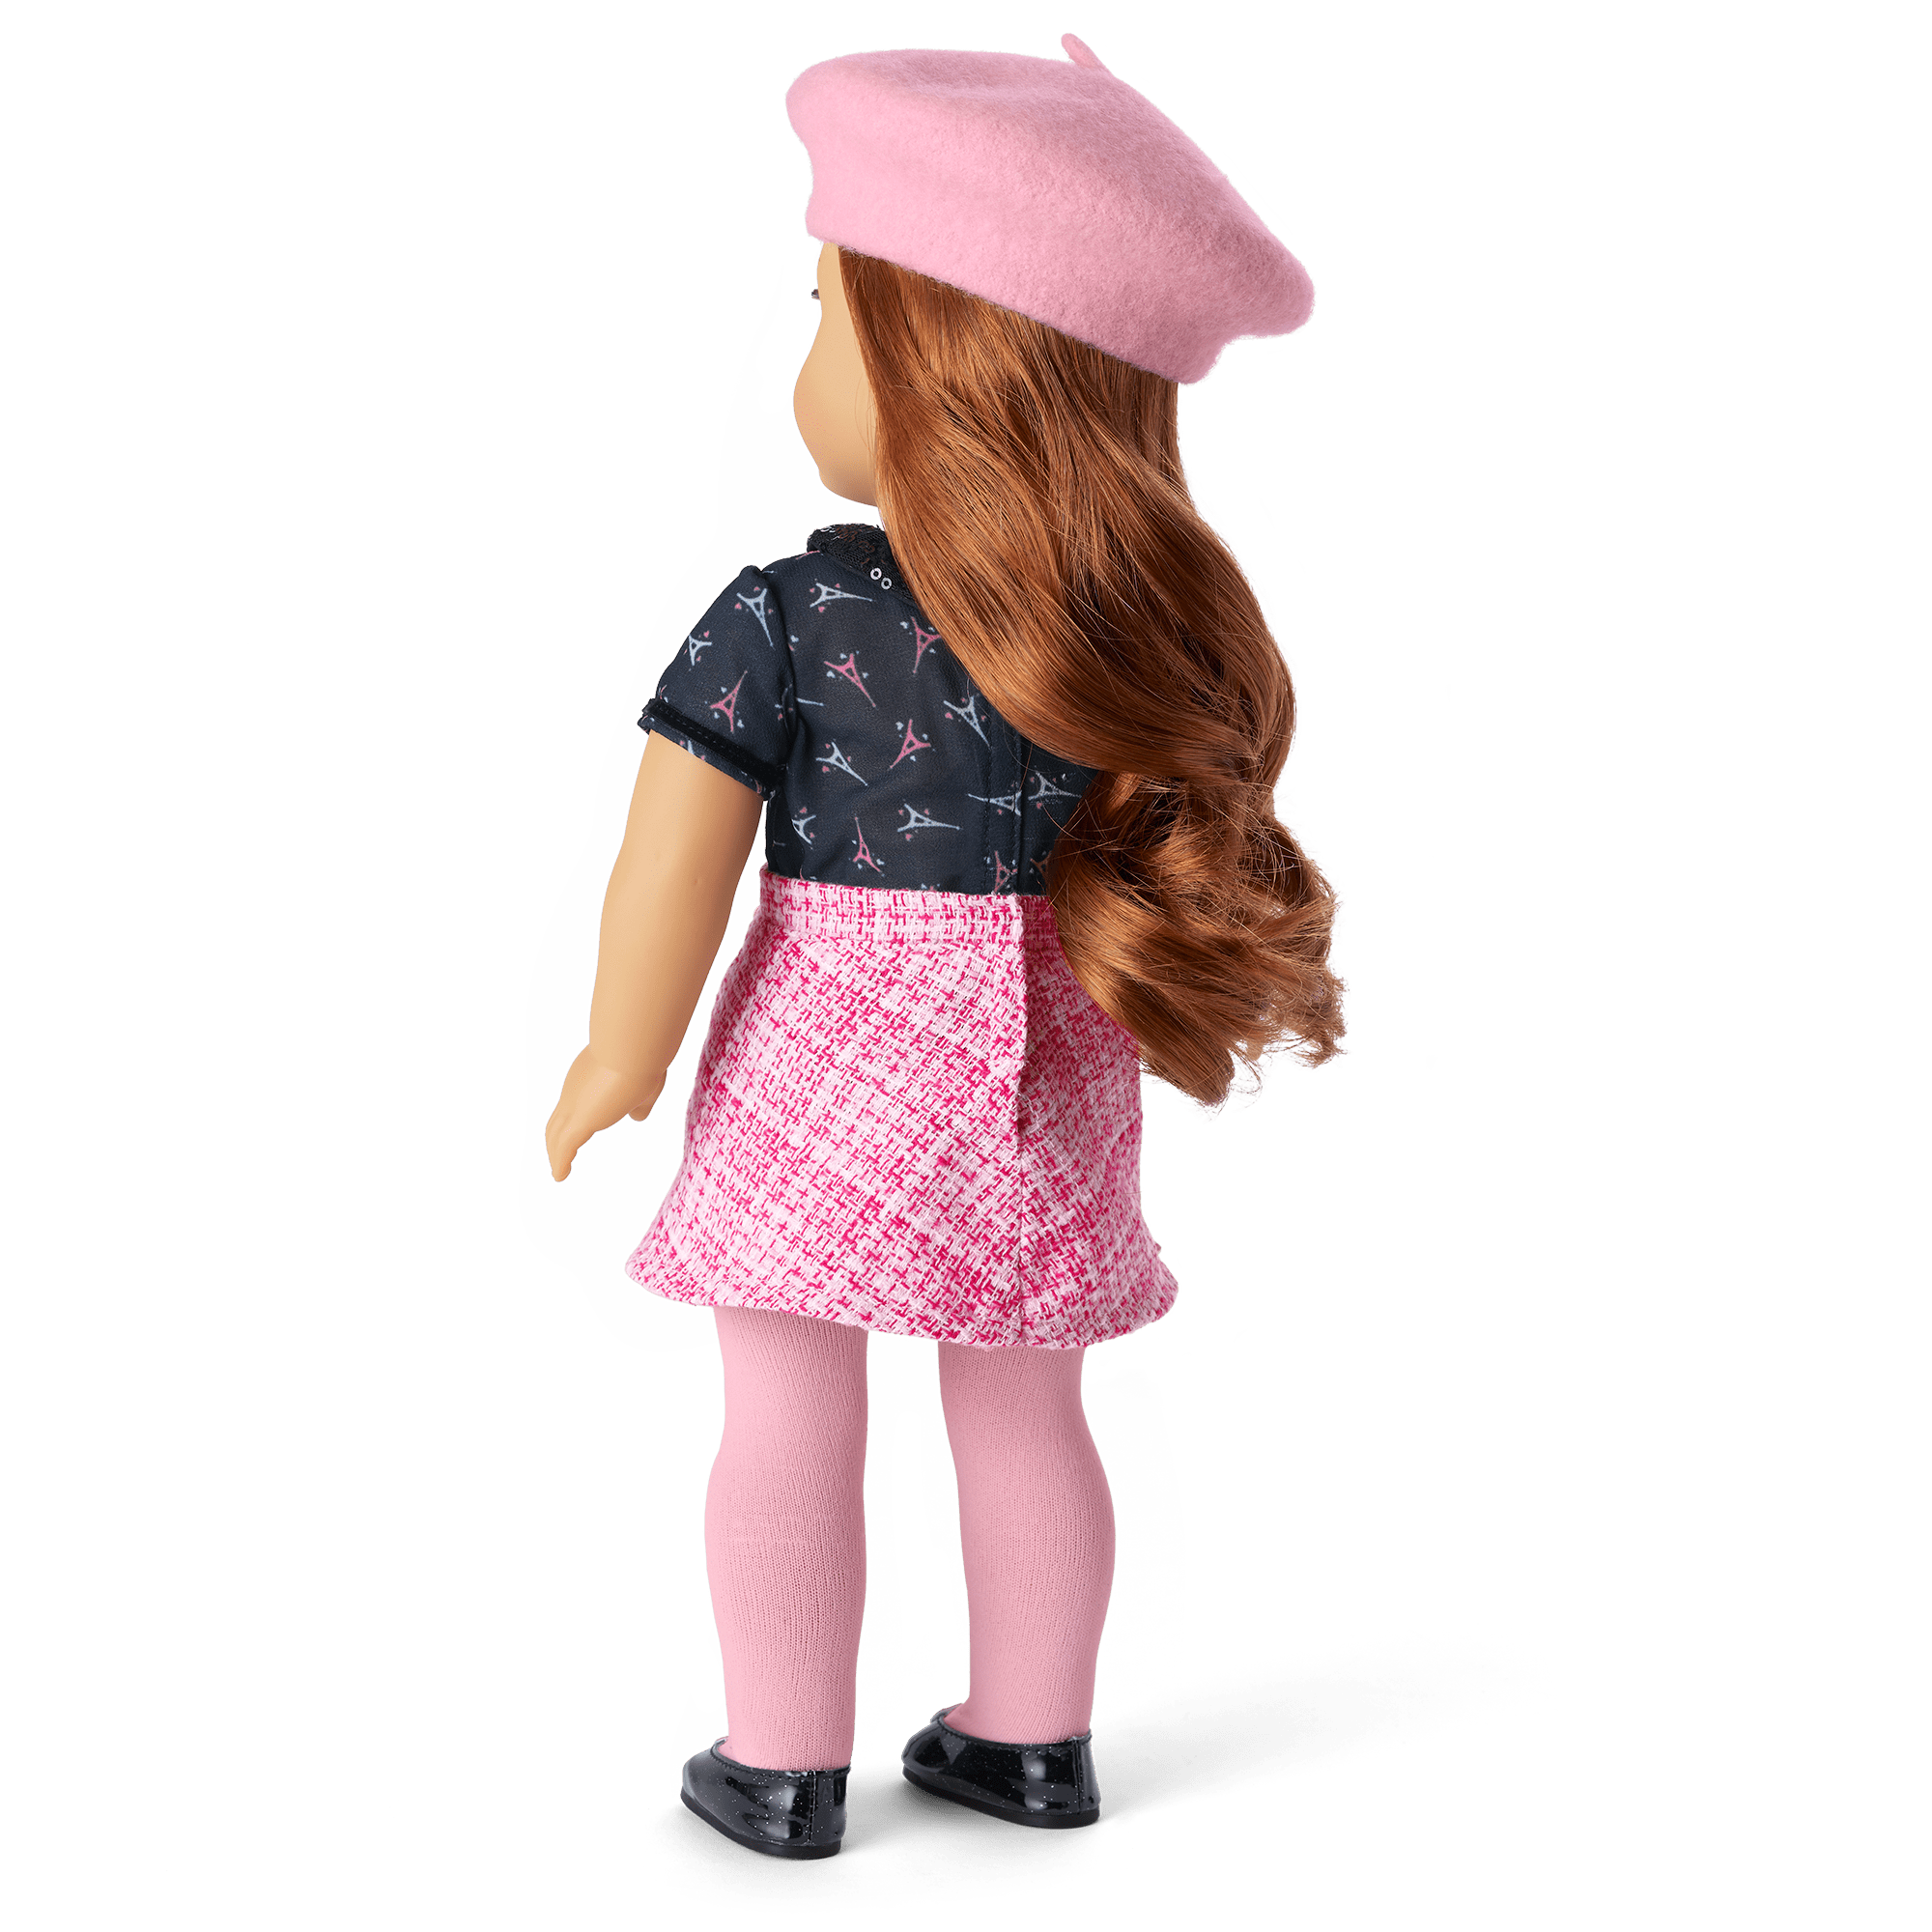 Buy Online American Girl Dolls, Outfits, Accessories - UK, France, Germany